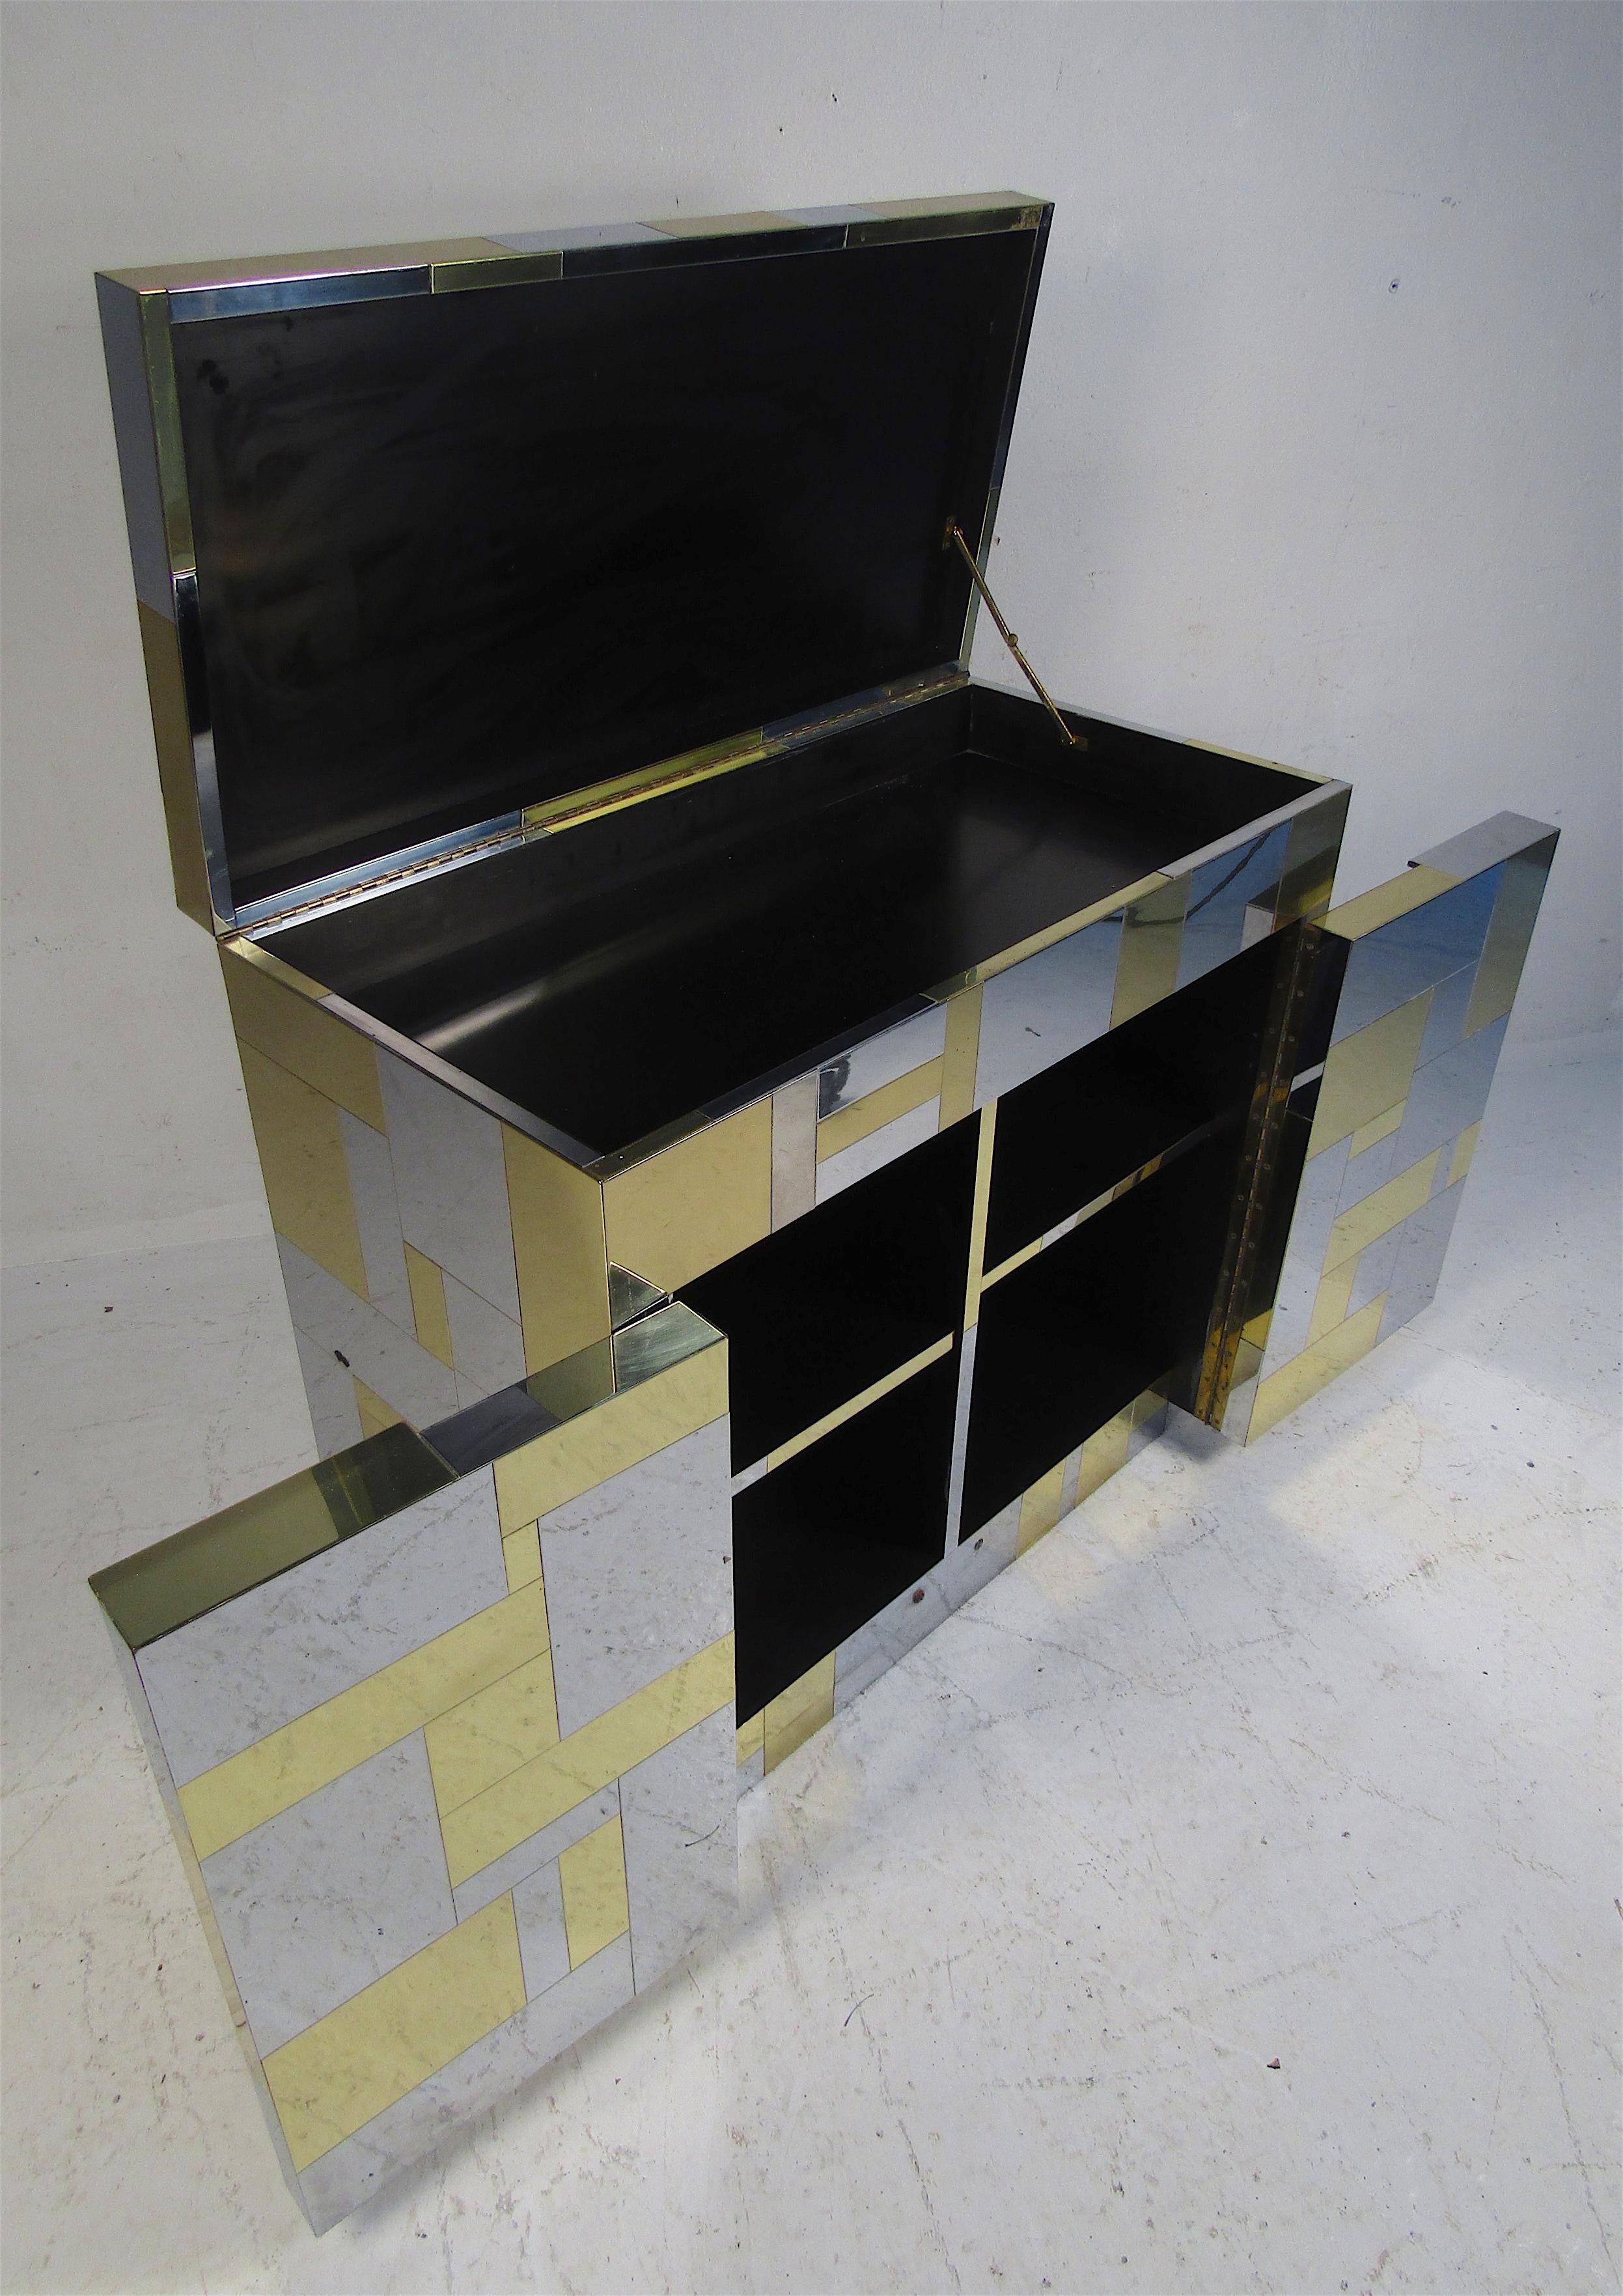 Beautiful signed Mid-Century Modern bar cabinet by Paul Evans for Directional. A wonderful patchwork design with a flip top and two cabinet doors below. Sleek case piece that looks great in any home, business, or office. Pe 200 series. Please